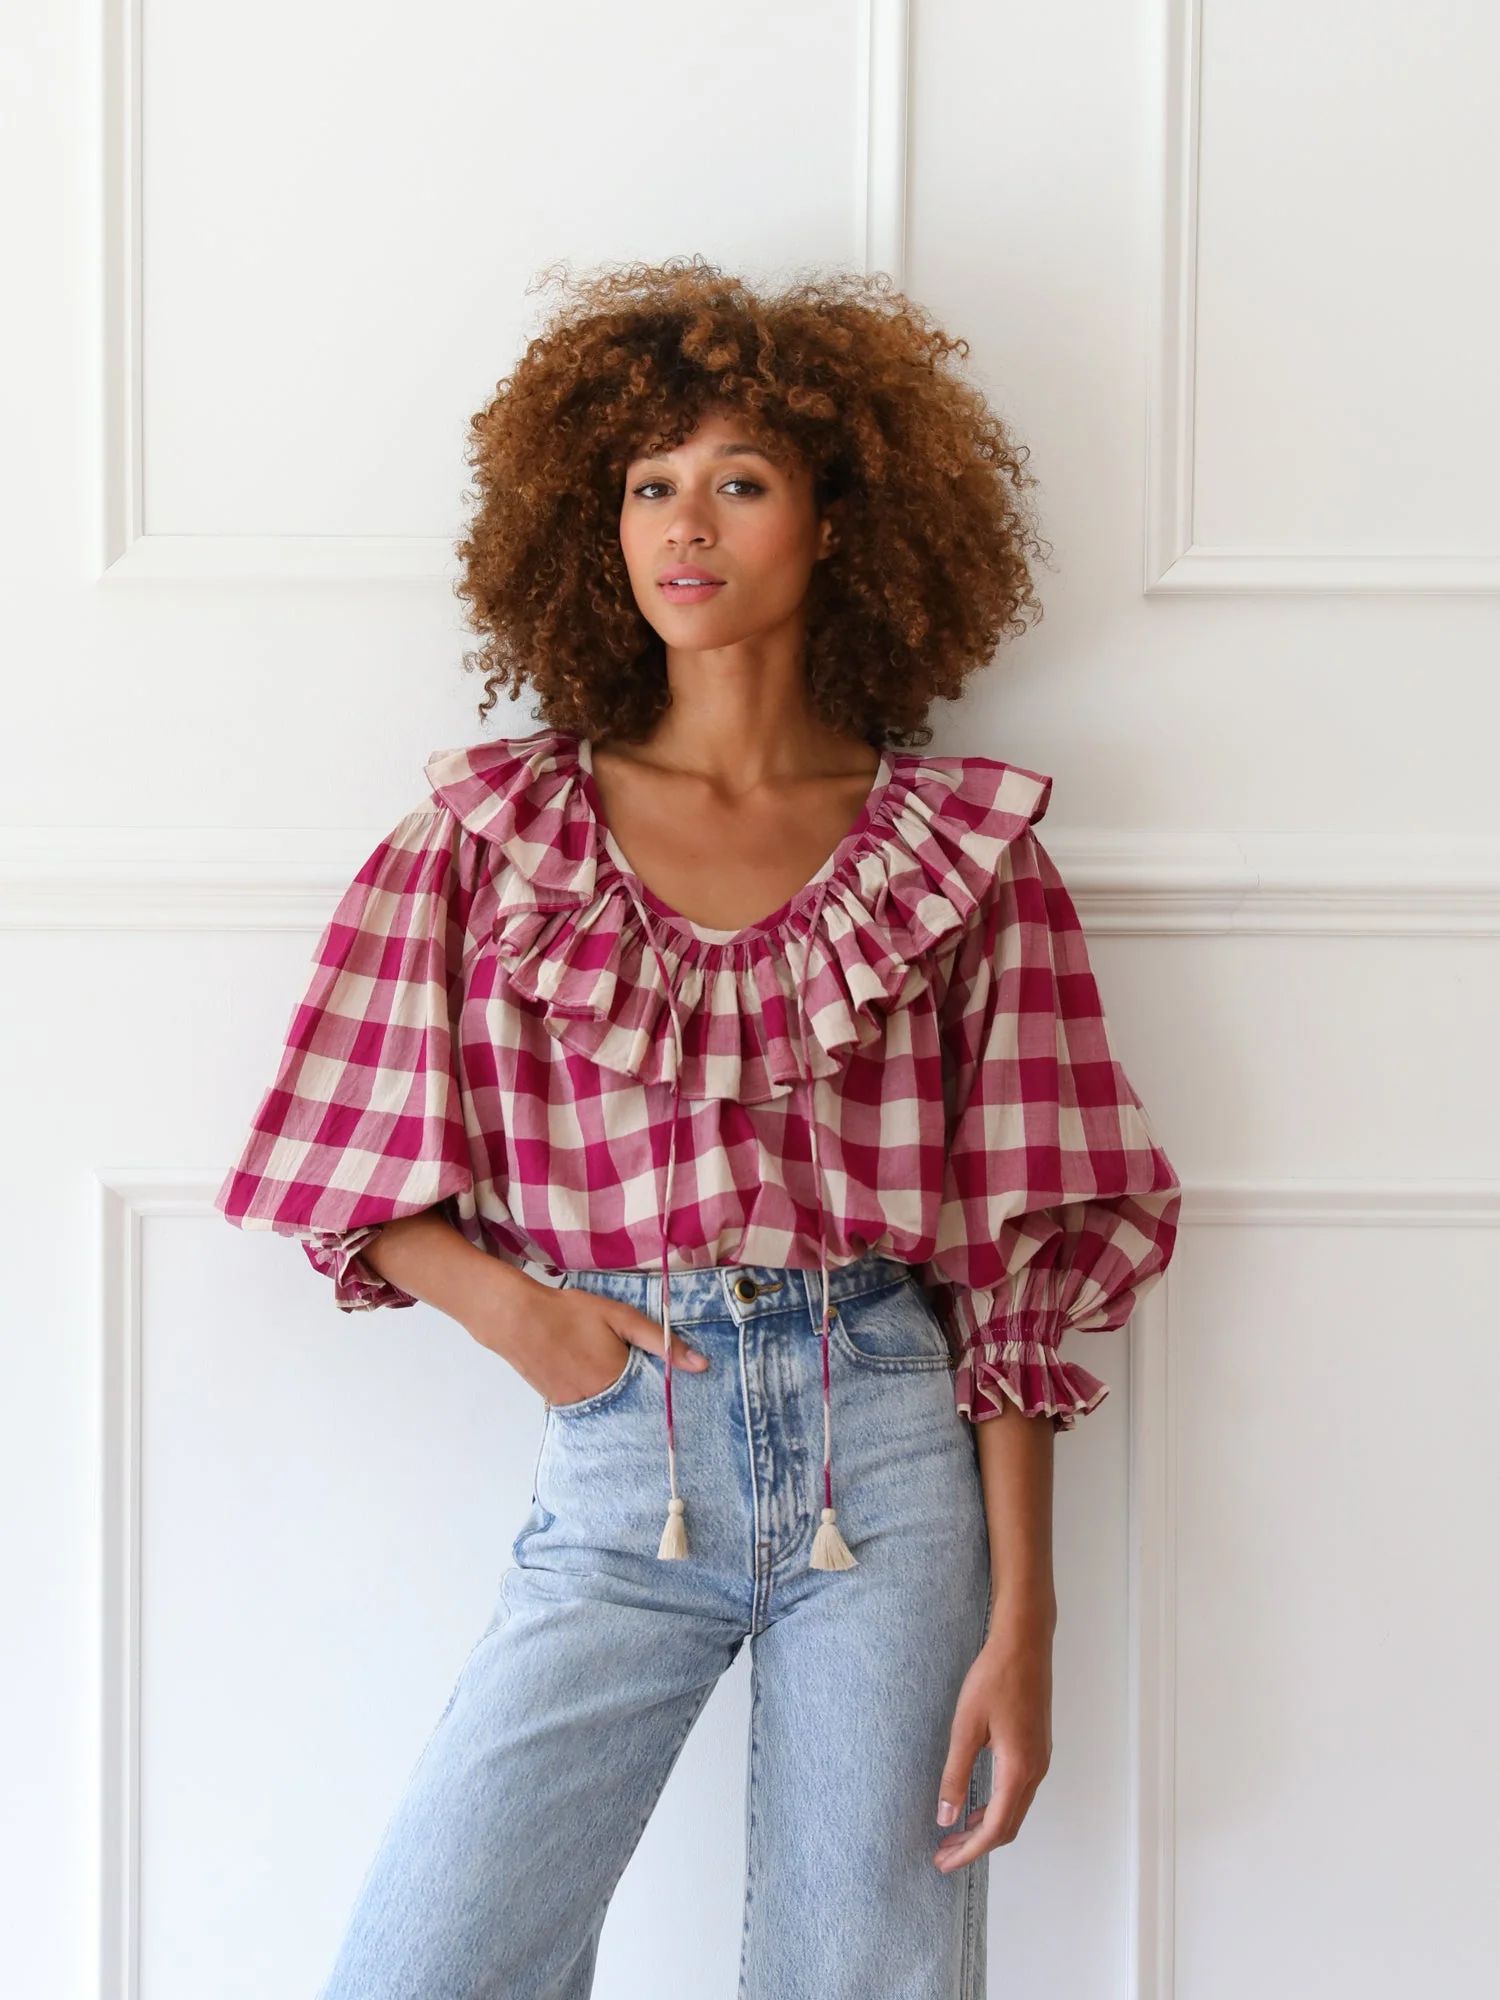 Shop Mille - May Top in Raspberry Plaid | Mille